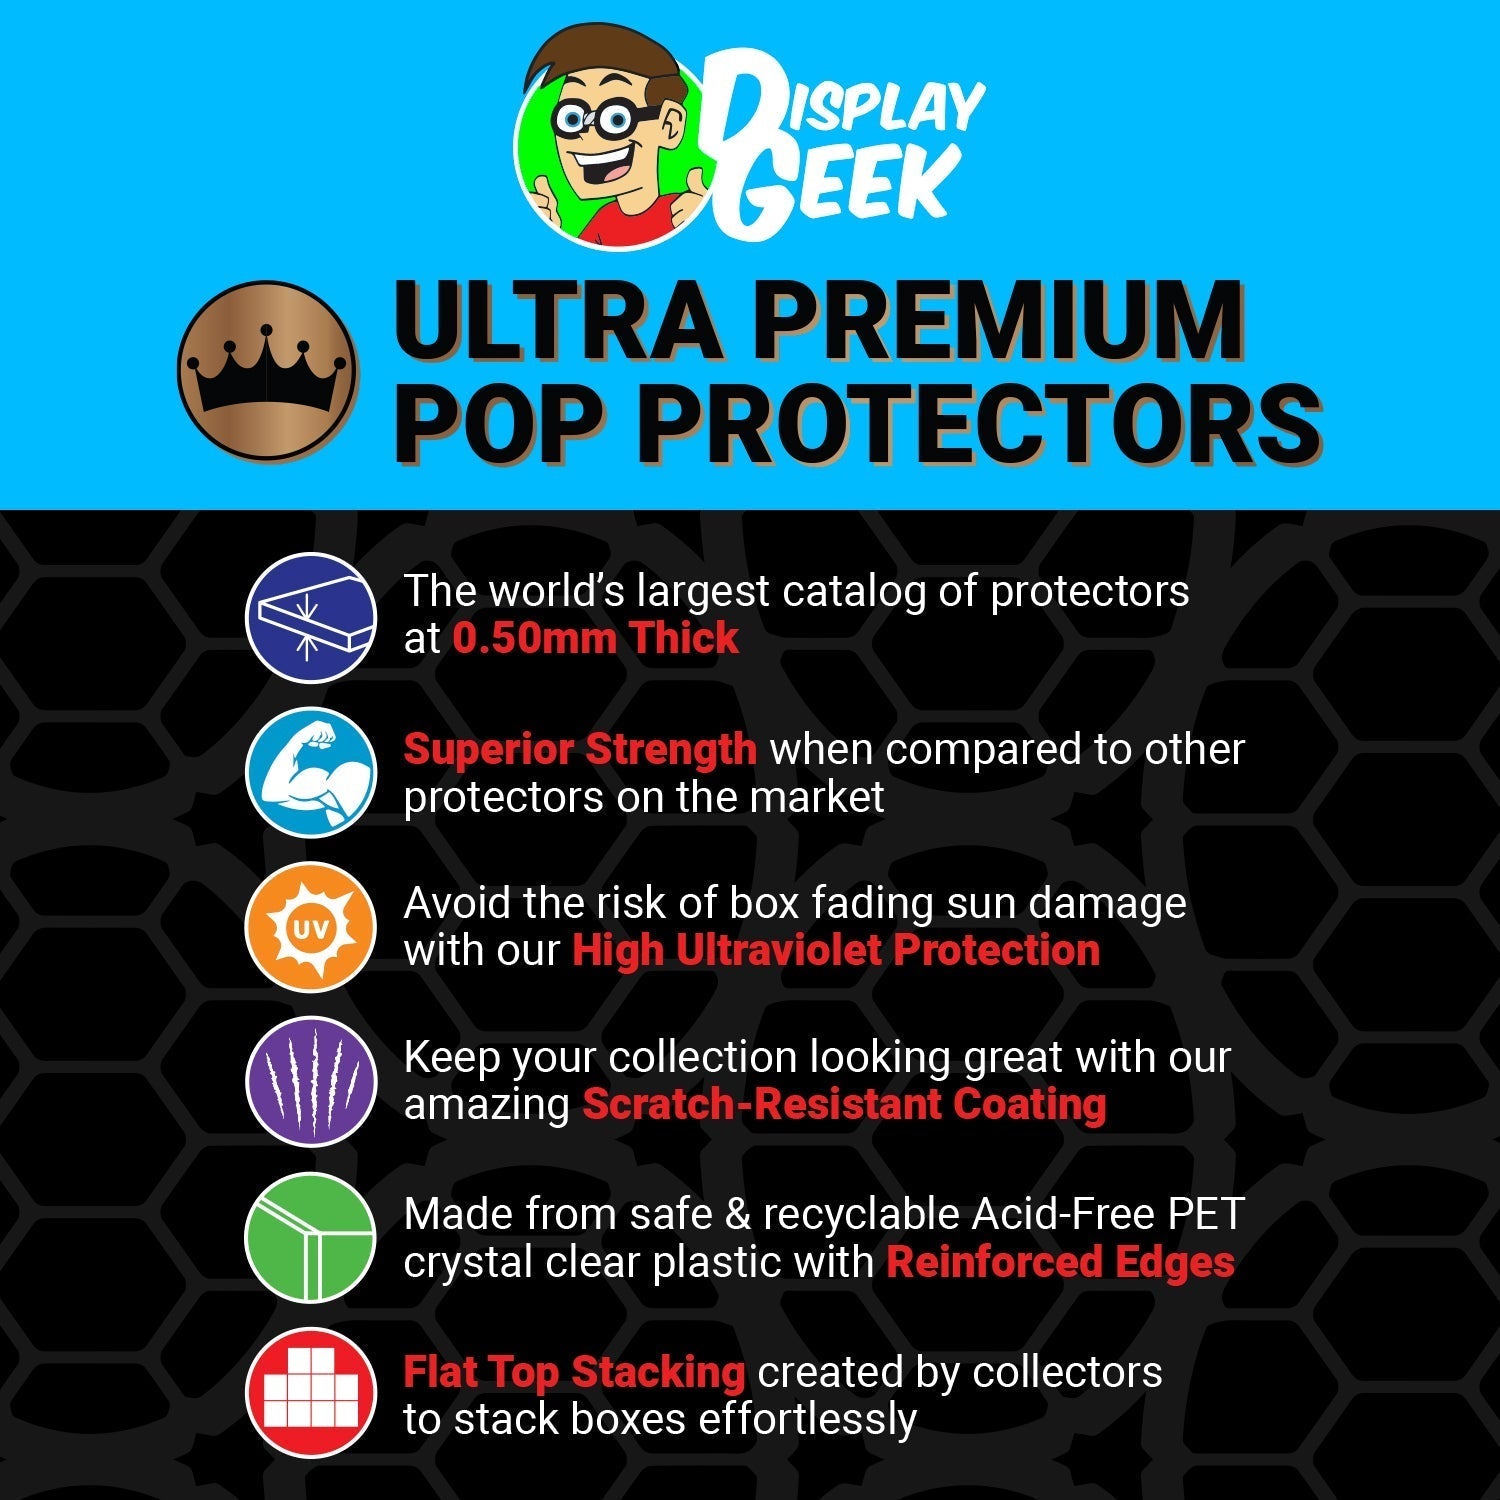 Pop Protector for 10 inch Lucario #863 Jumbo Funko Pop - PPG Pop Protector Guide Search Created by Display Geek